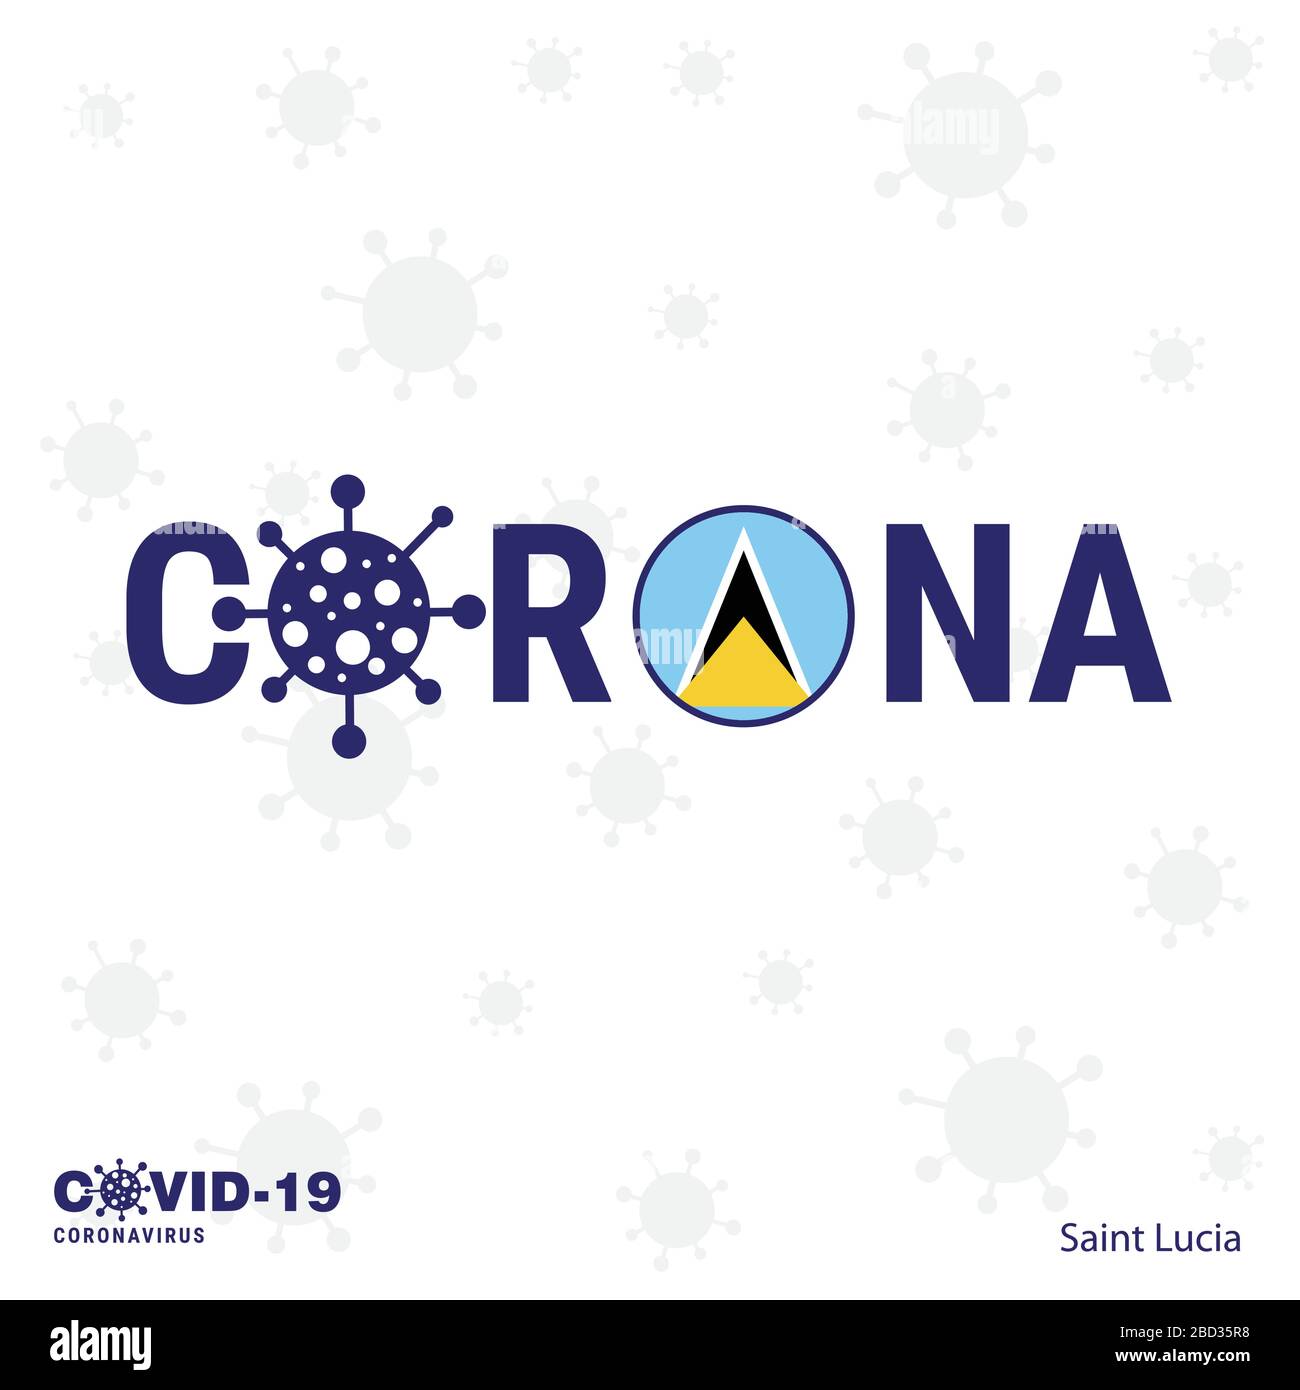 Saint Lucia Coronavirus Typography. COVID-19 country banner. Stay home, Stay Healthy. Take care of your own health Stock Vector